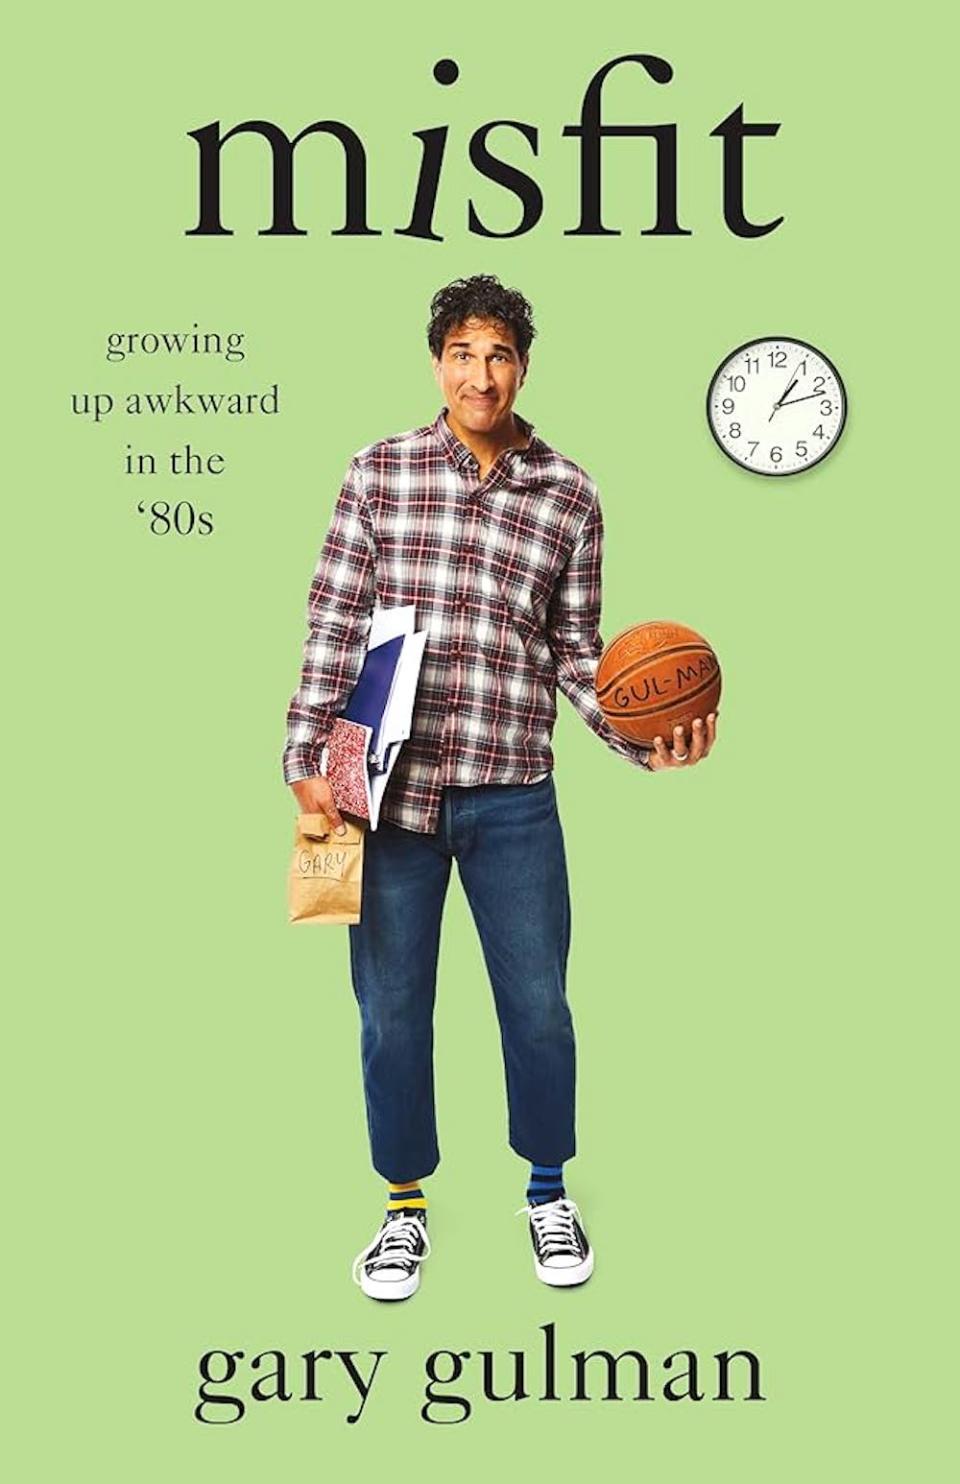 'Misfit: Growing Up Awkward in the '80s' by Gary Gulman.